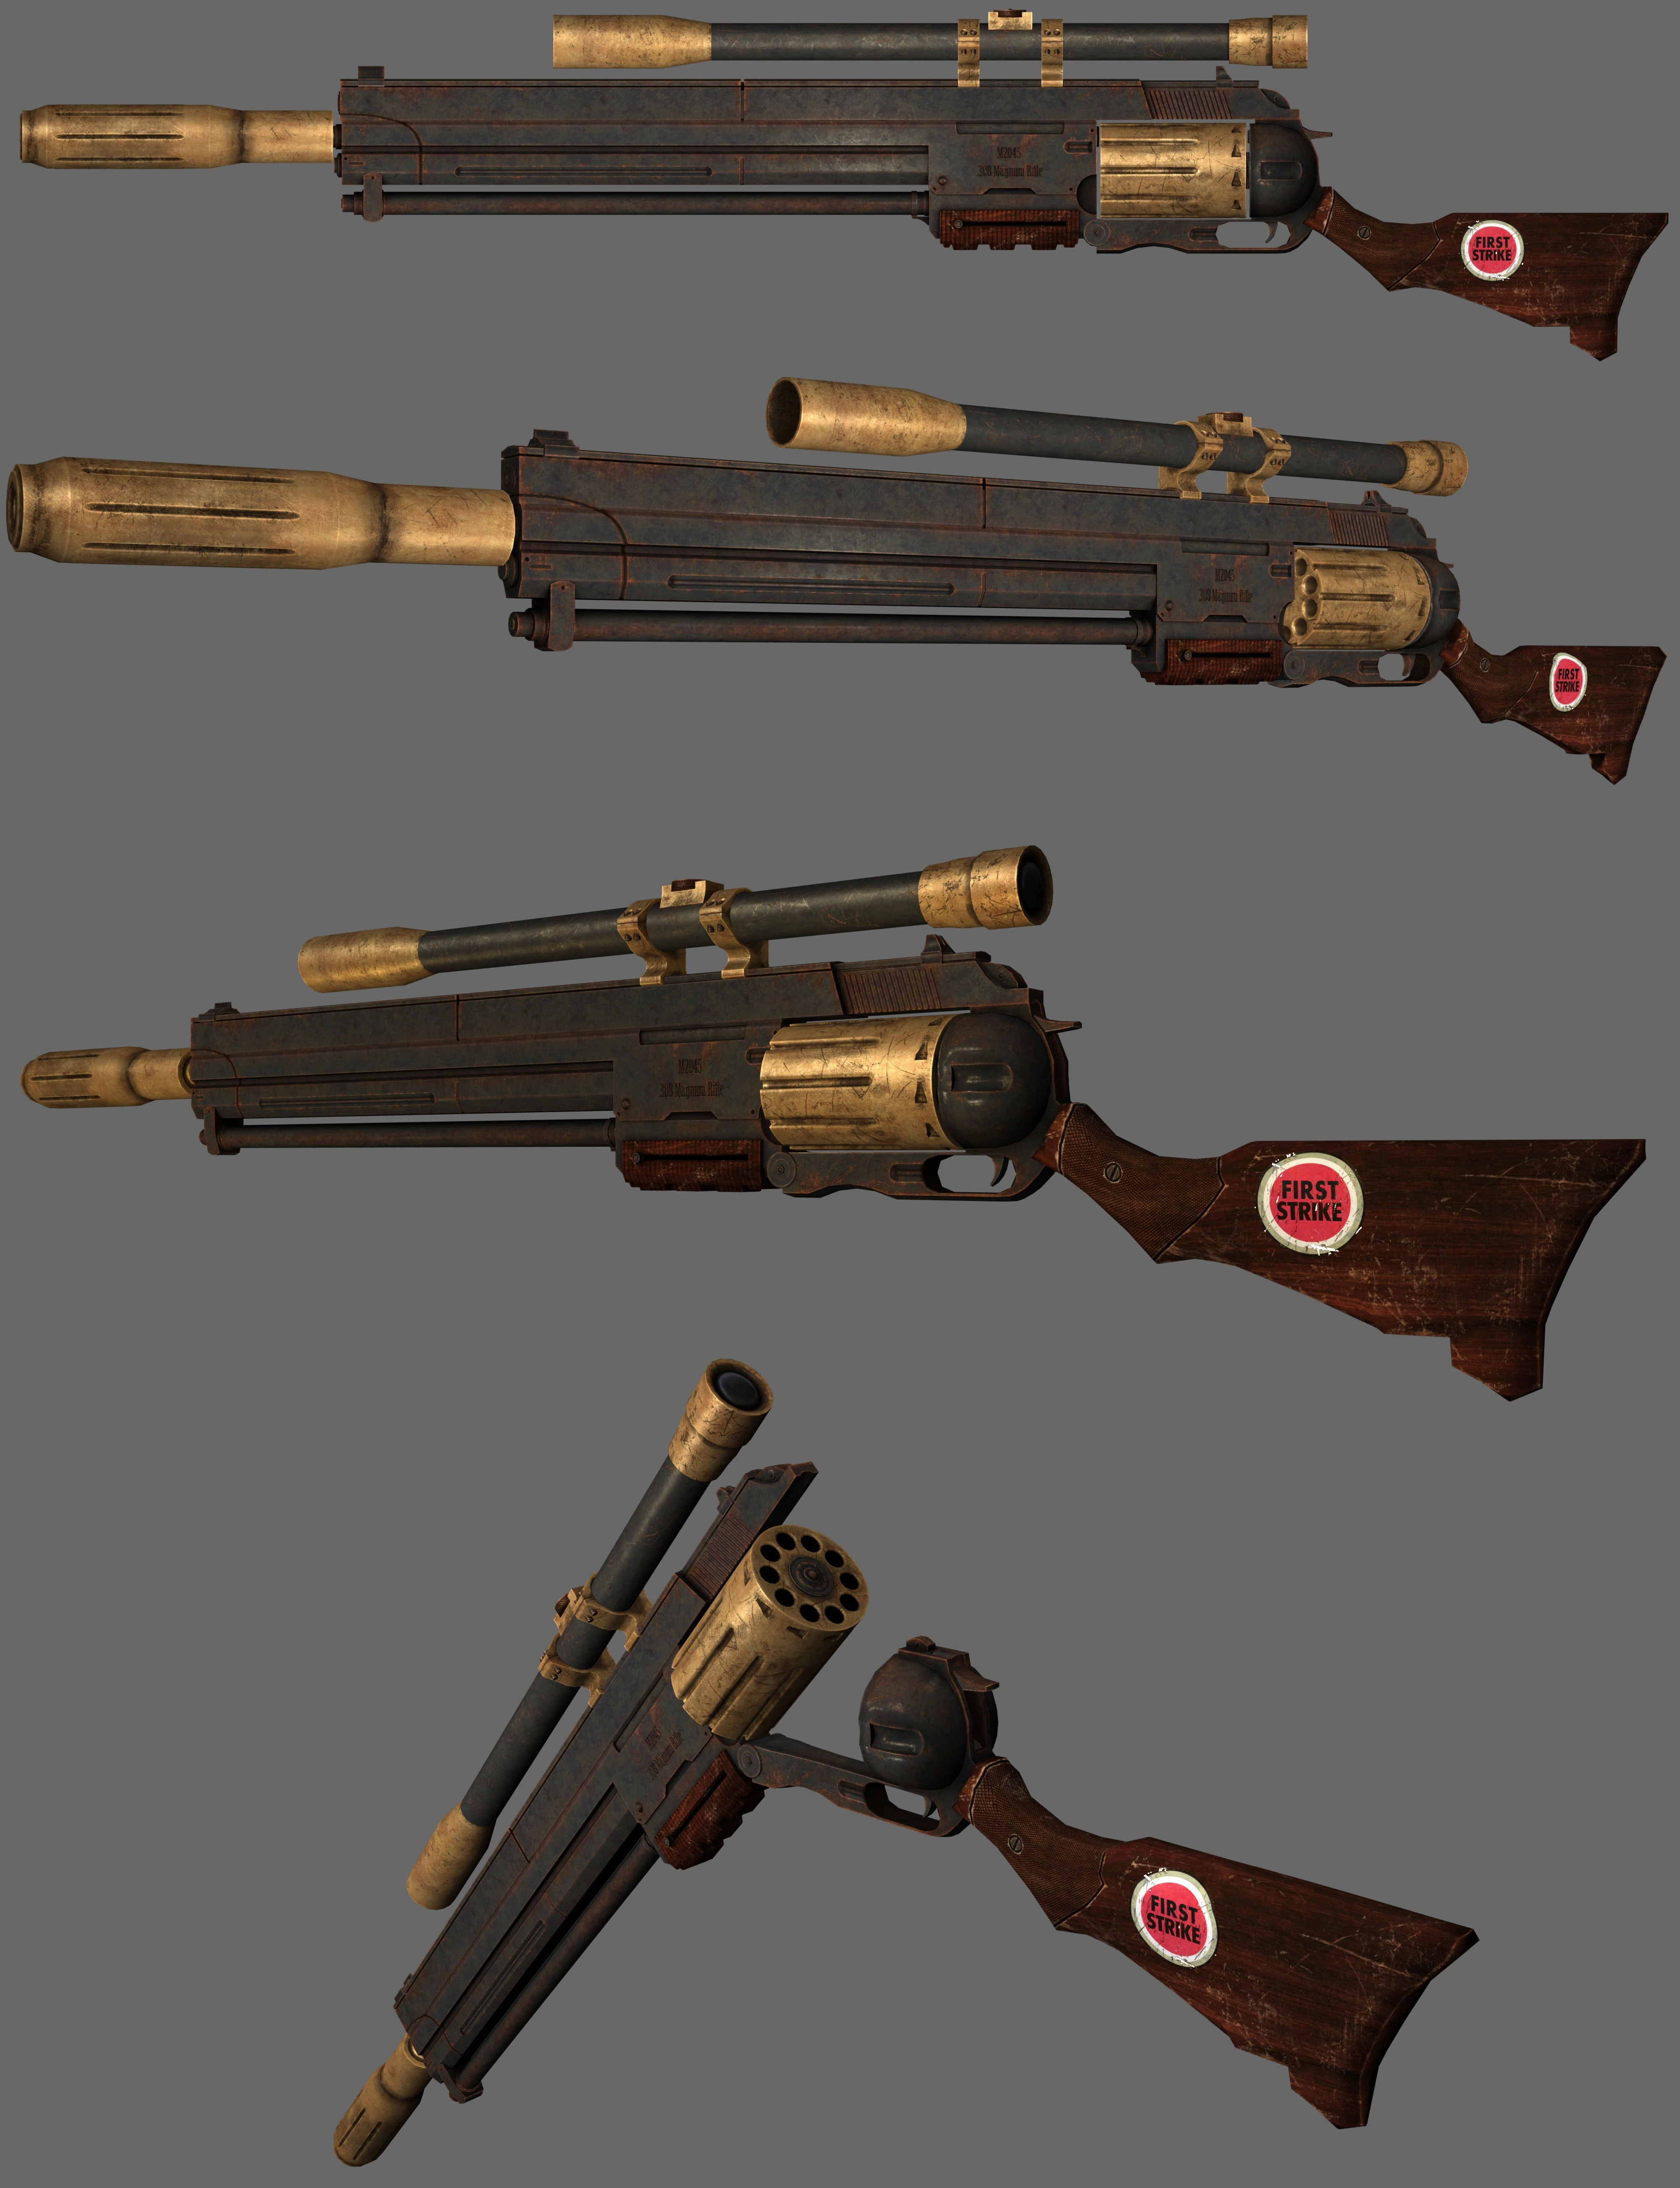 Fallout 4 new vegas weapons фото 22